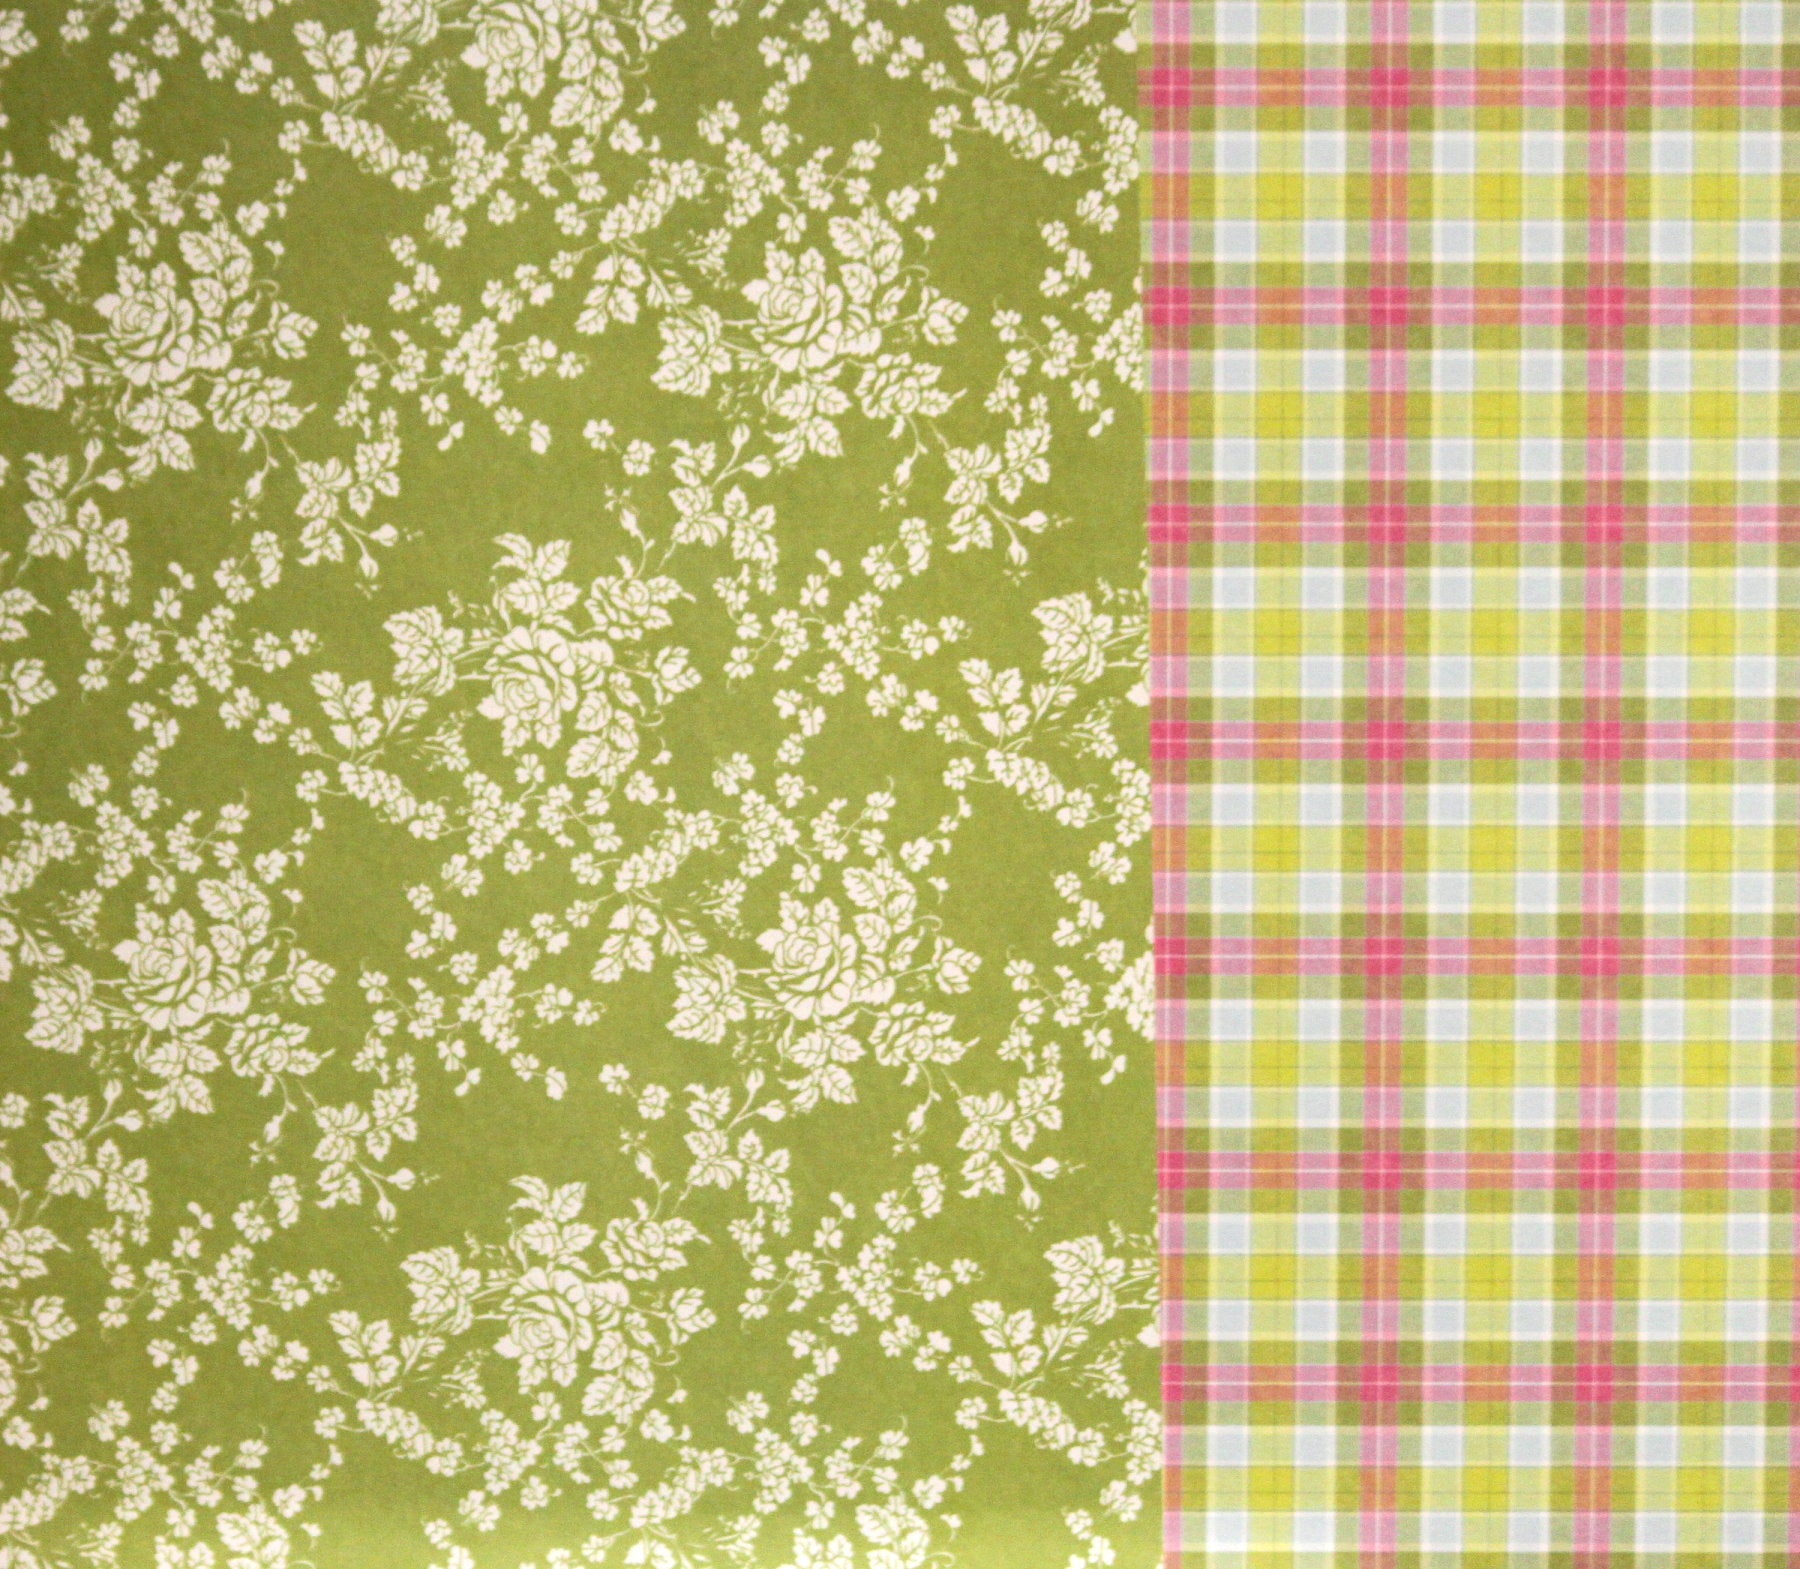 First Edition Paper Pretty Posy 12 x 12 Pea Green Floral Double-sided Cardstock Paper